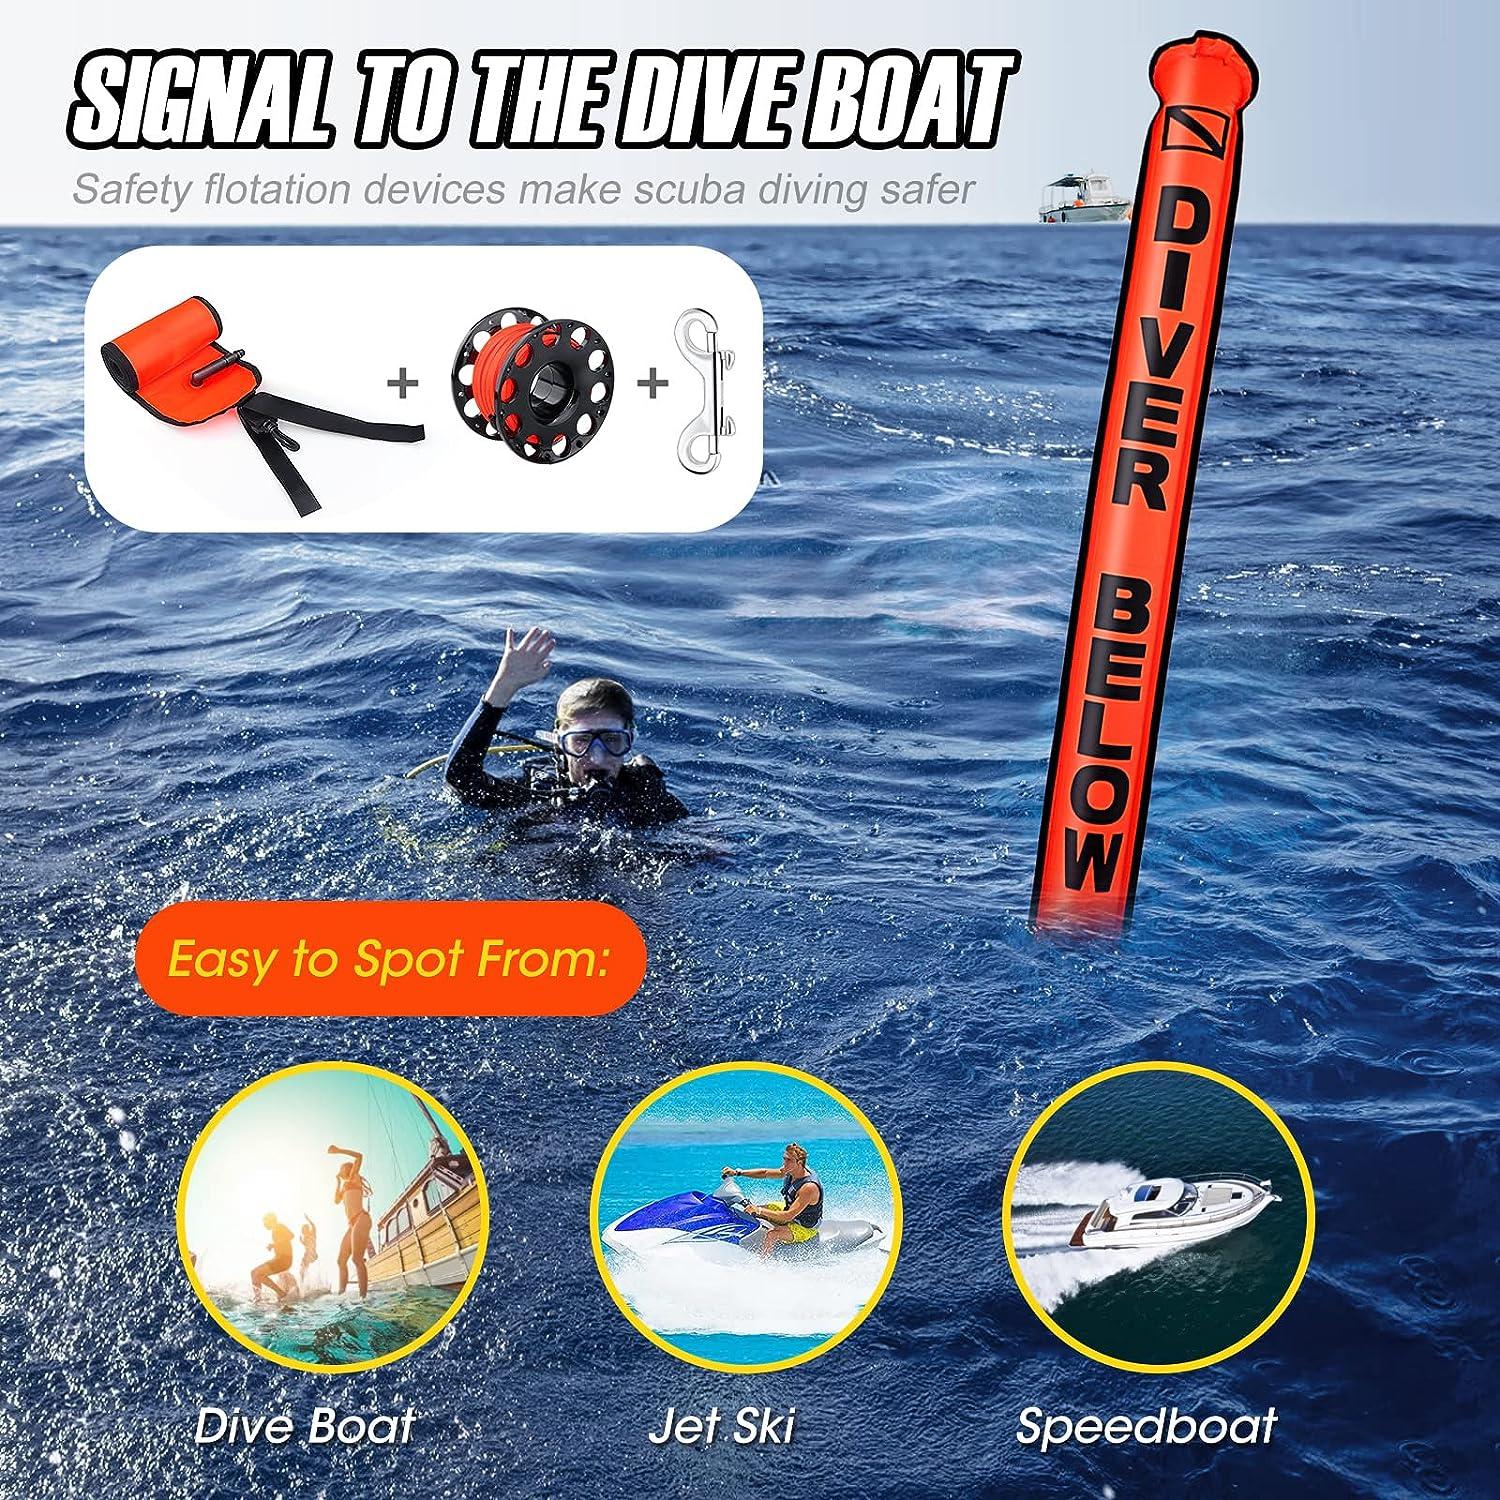 Wholesale ais fishing buoy For Your Marine Activities 